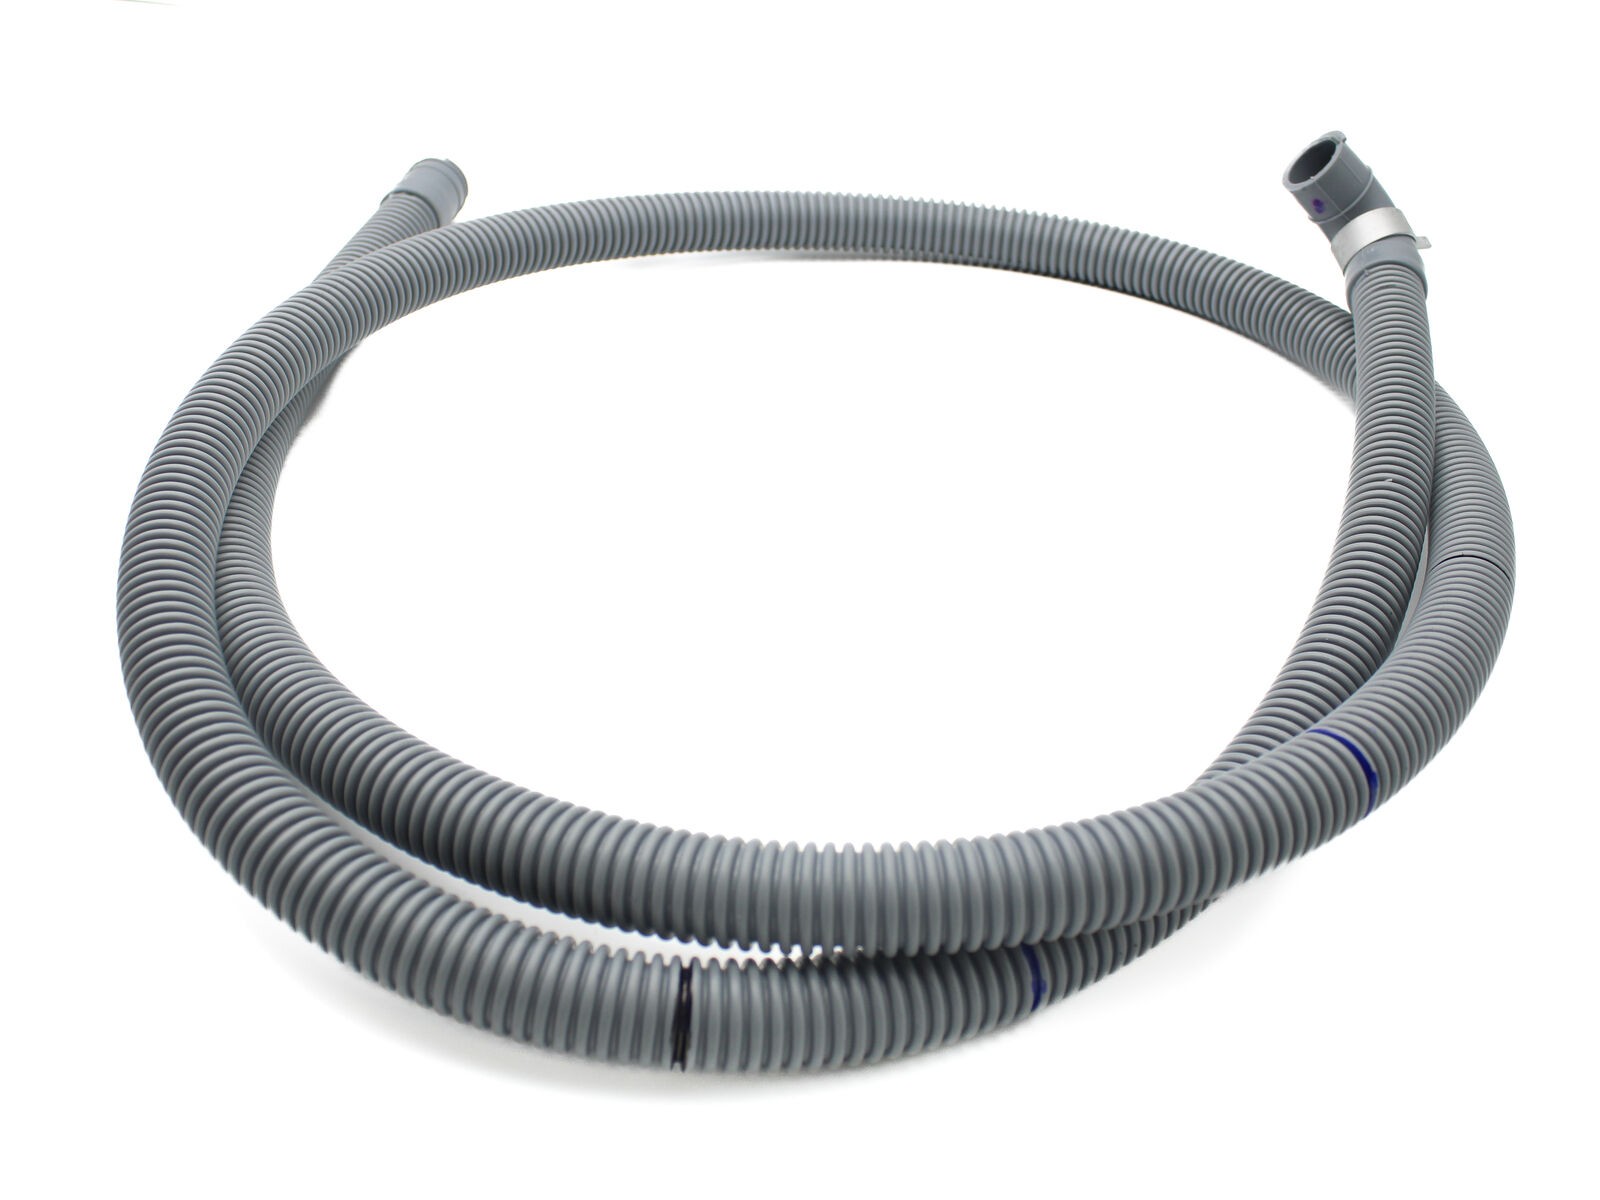 Hose for washing machine LG Hoses for washing machines, dishwashers and accessories thereof, lintels, gaskets